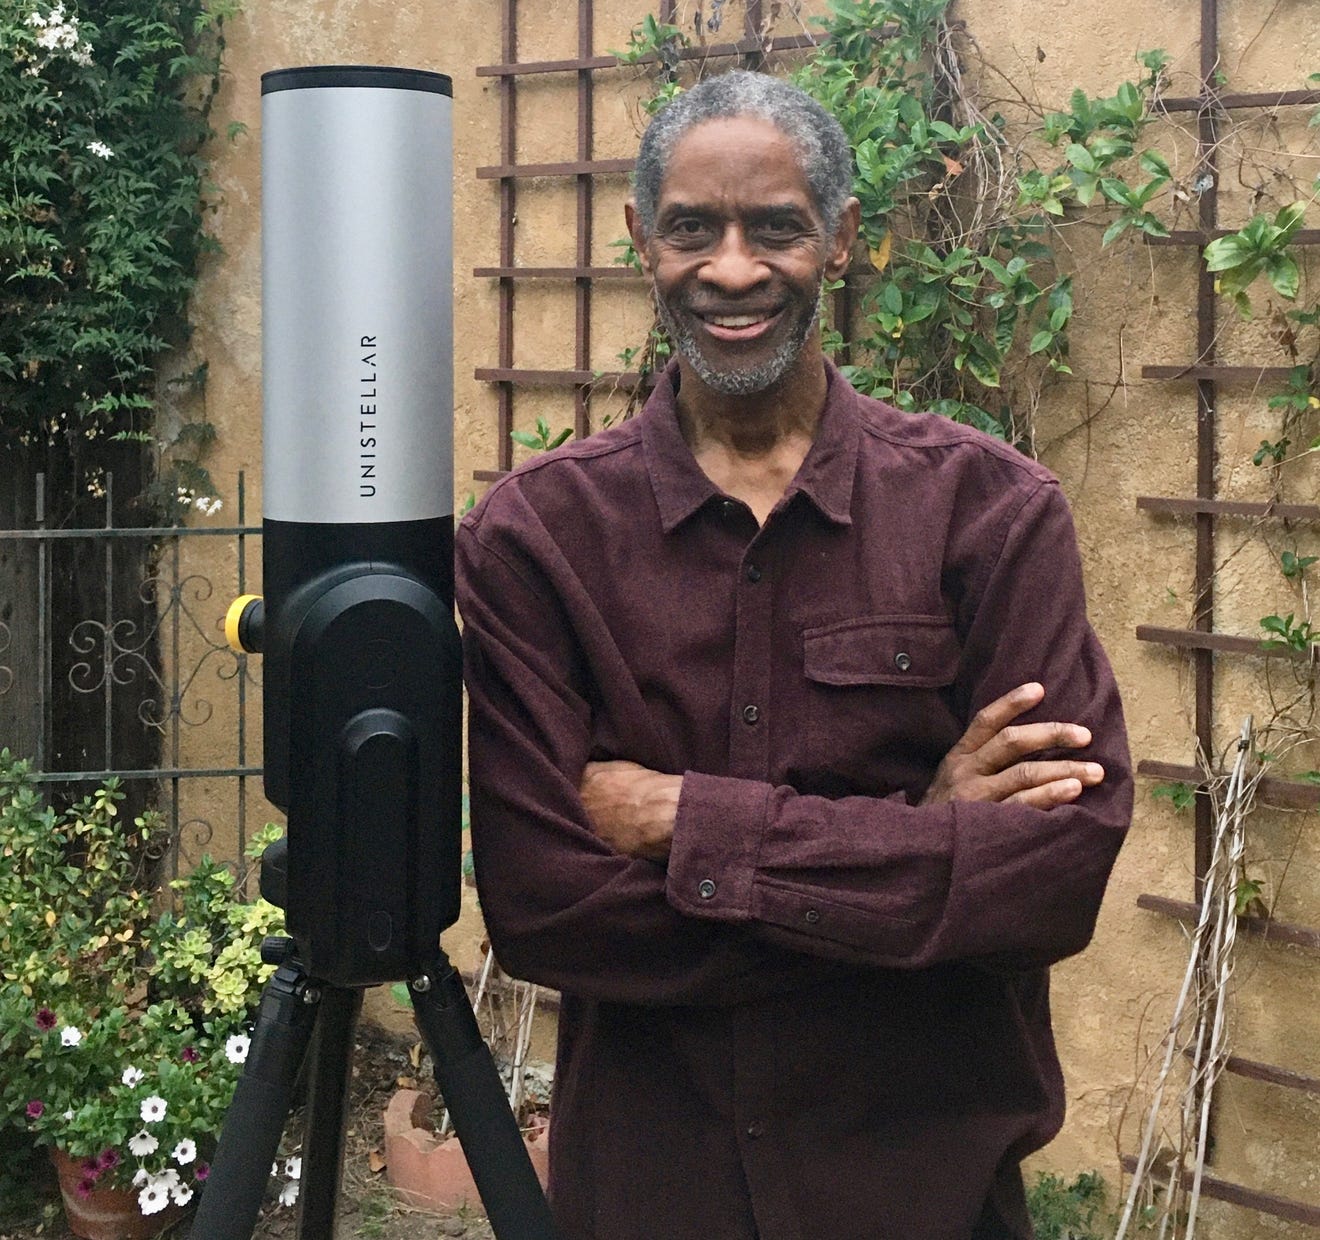 Tim Russ from Star Trek: Voyager poses with his backyard telescope